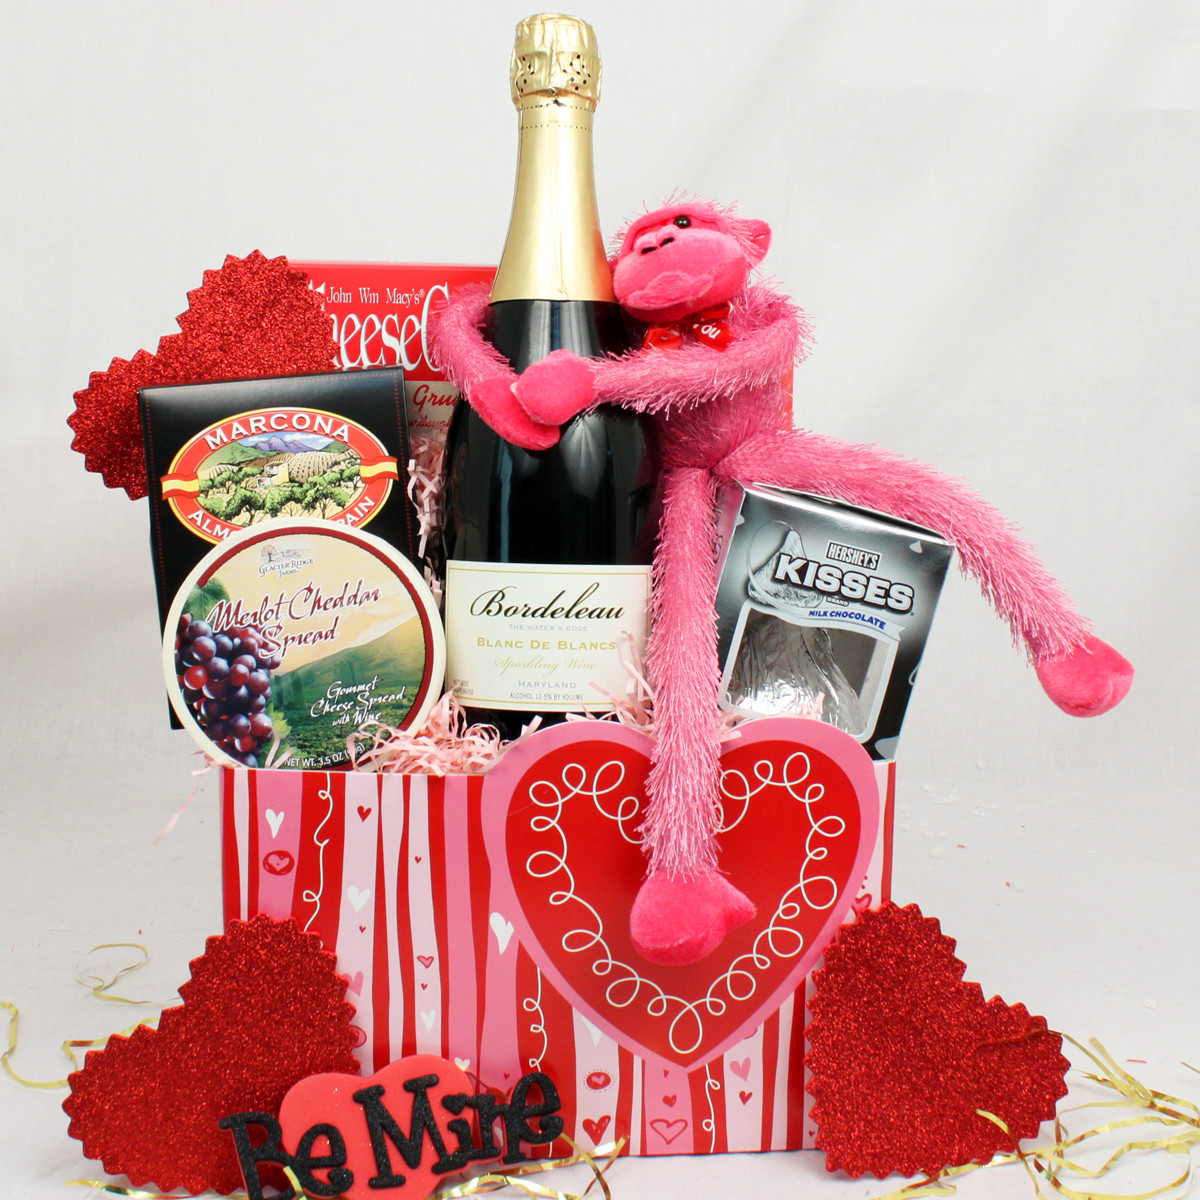 Awesome Valentines Day Ideas For Her
 Creative and Thoughtful Valentine’s Day Gifts for Her